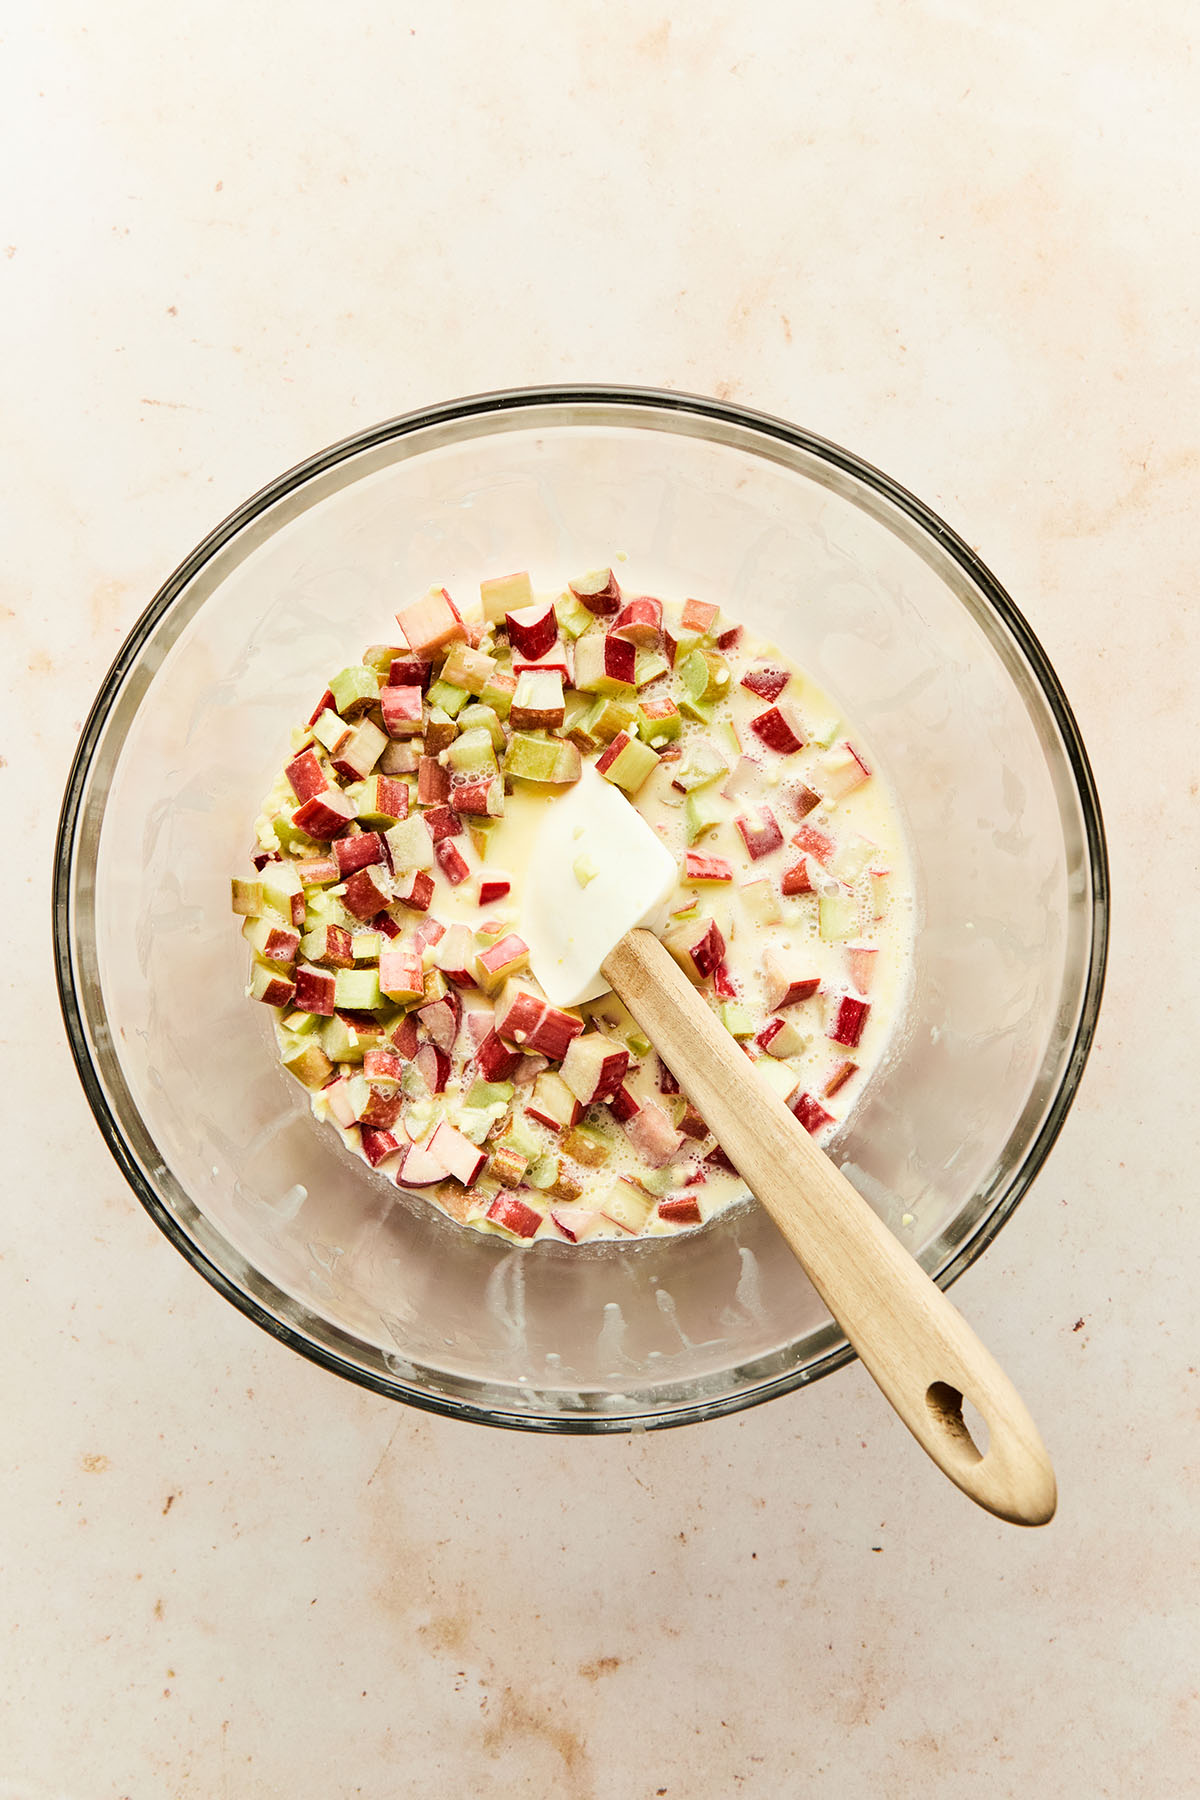 Chopped rhubarb mixed with cream, egg, sugar, and chopped ginger in a bowl.